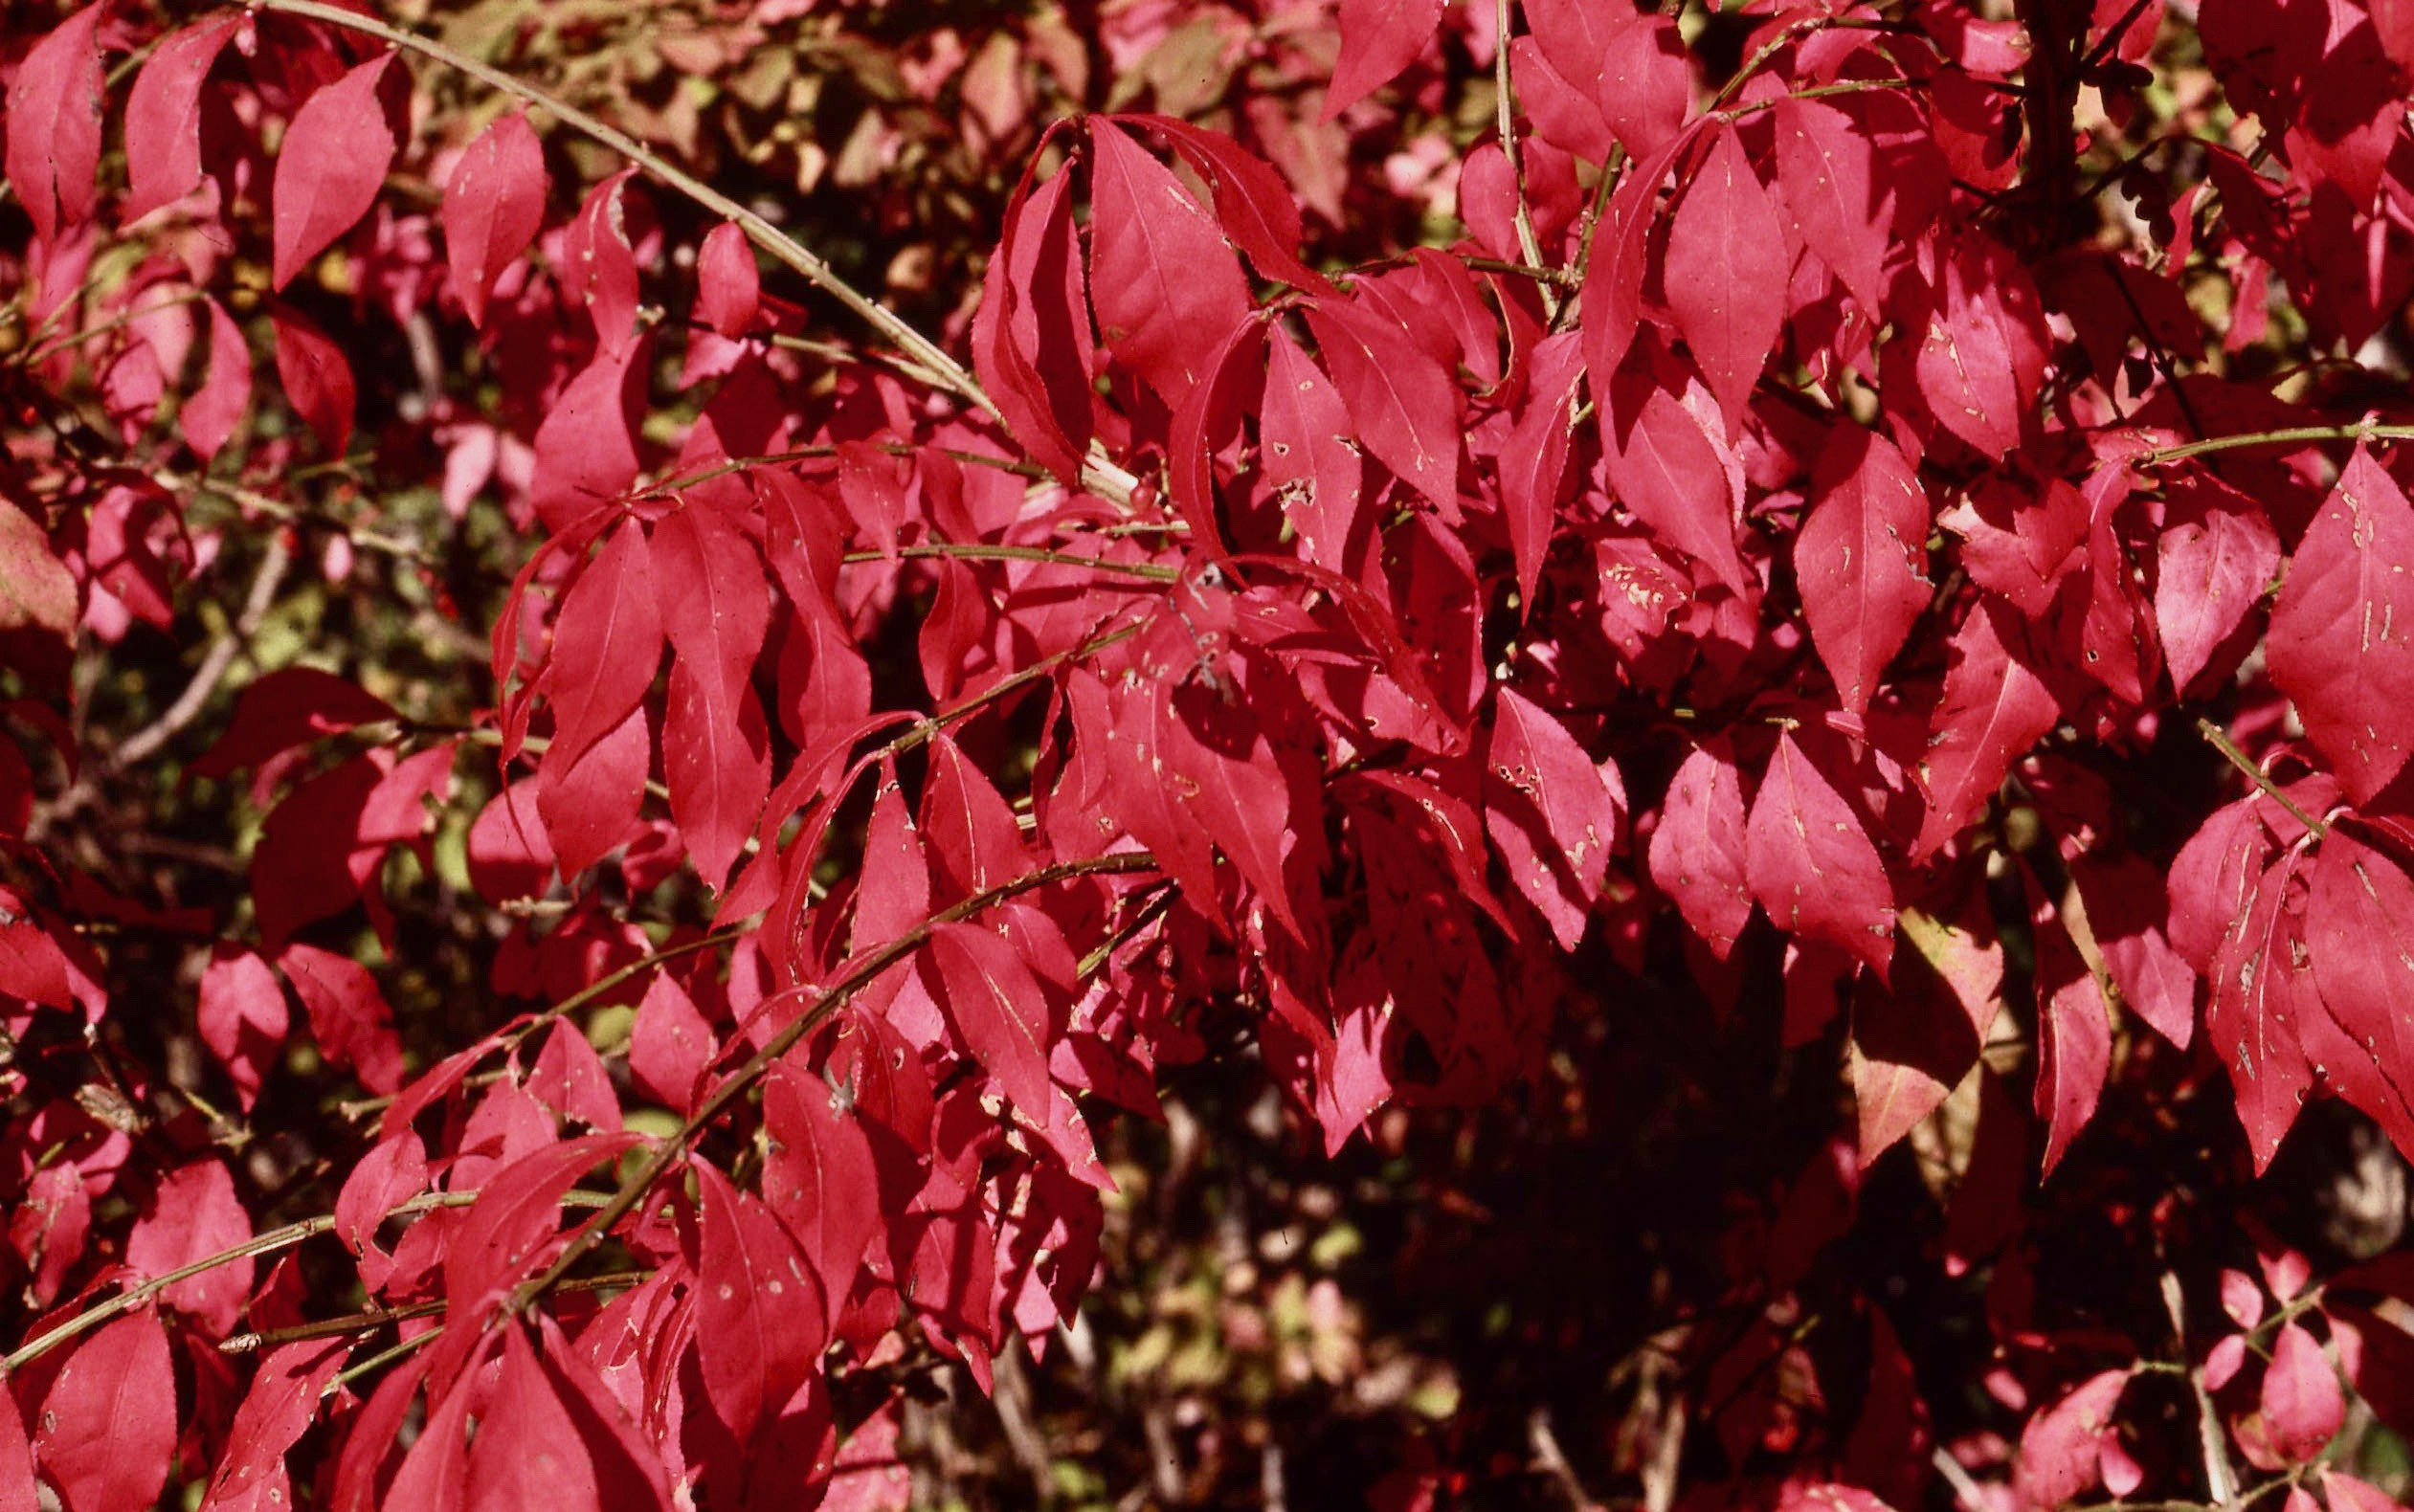 The Scientific Name is Euonymus alatus. You will likely hear them called Winged Euonymus, Burning Bush, Winged Wahoo. This picture shows the The brilliant red fall foliage gives this plant the name 